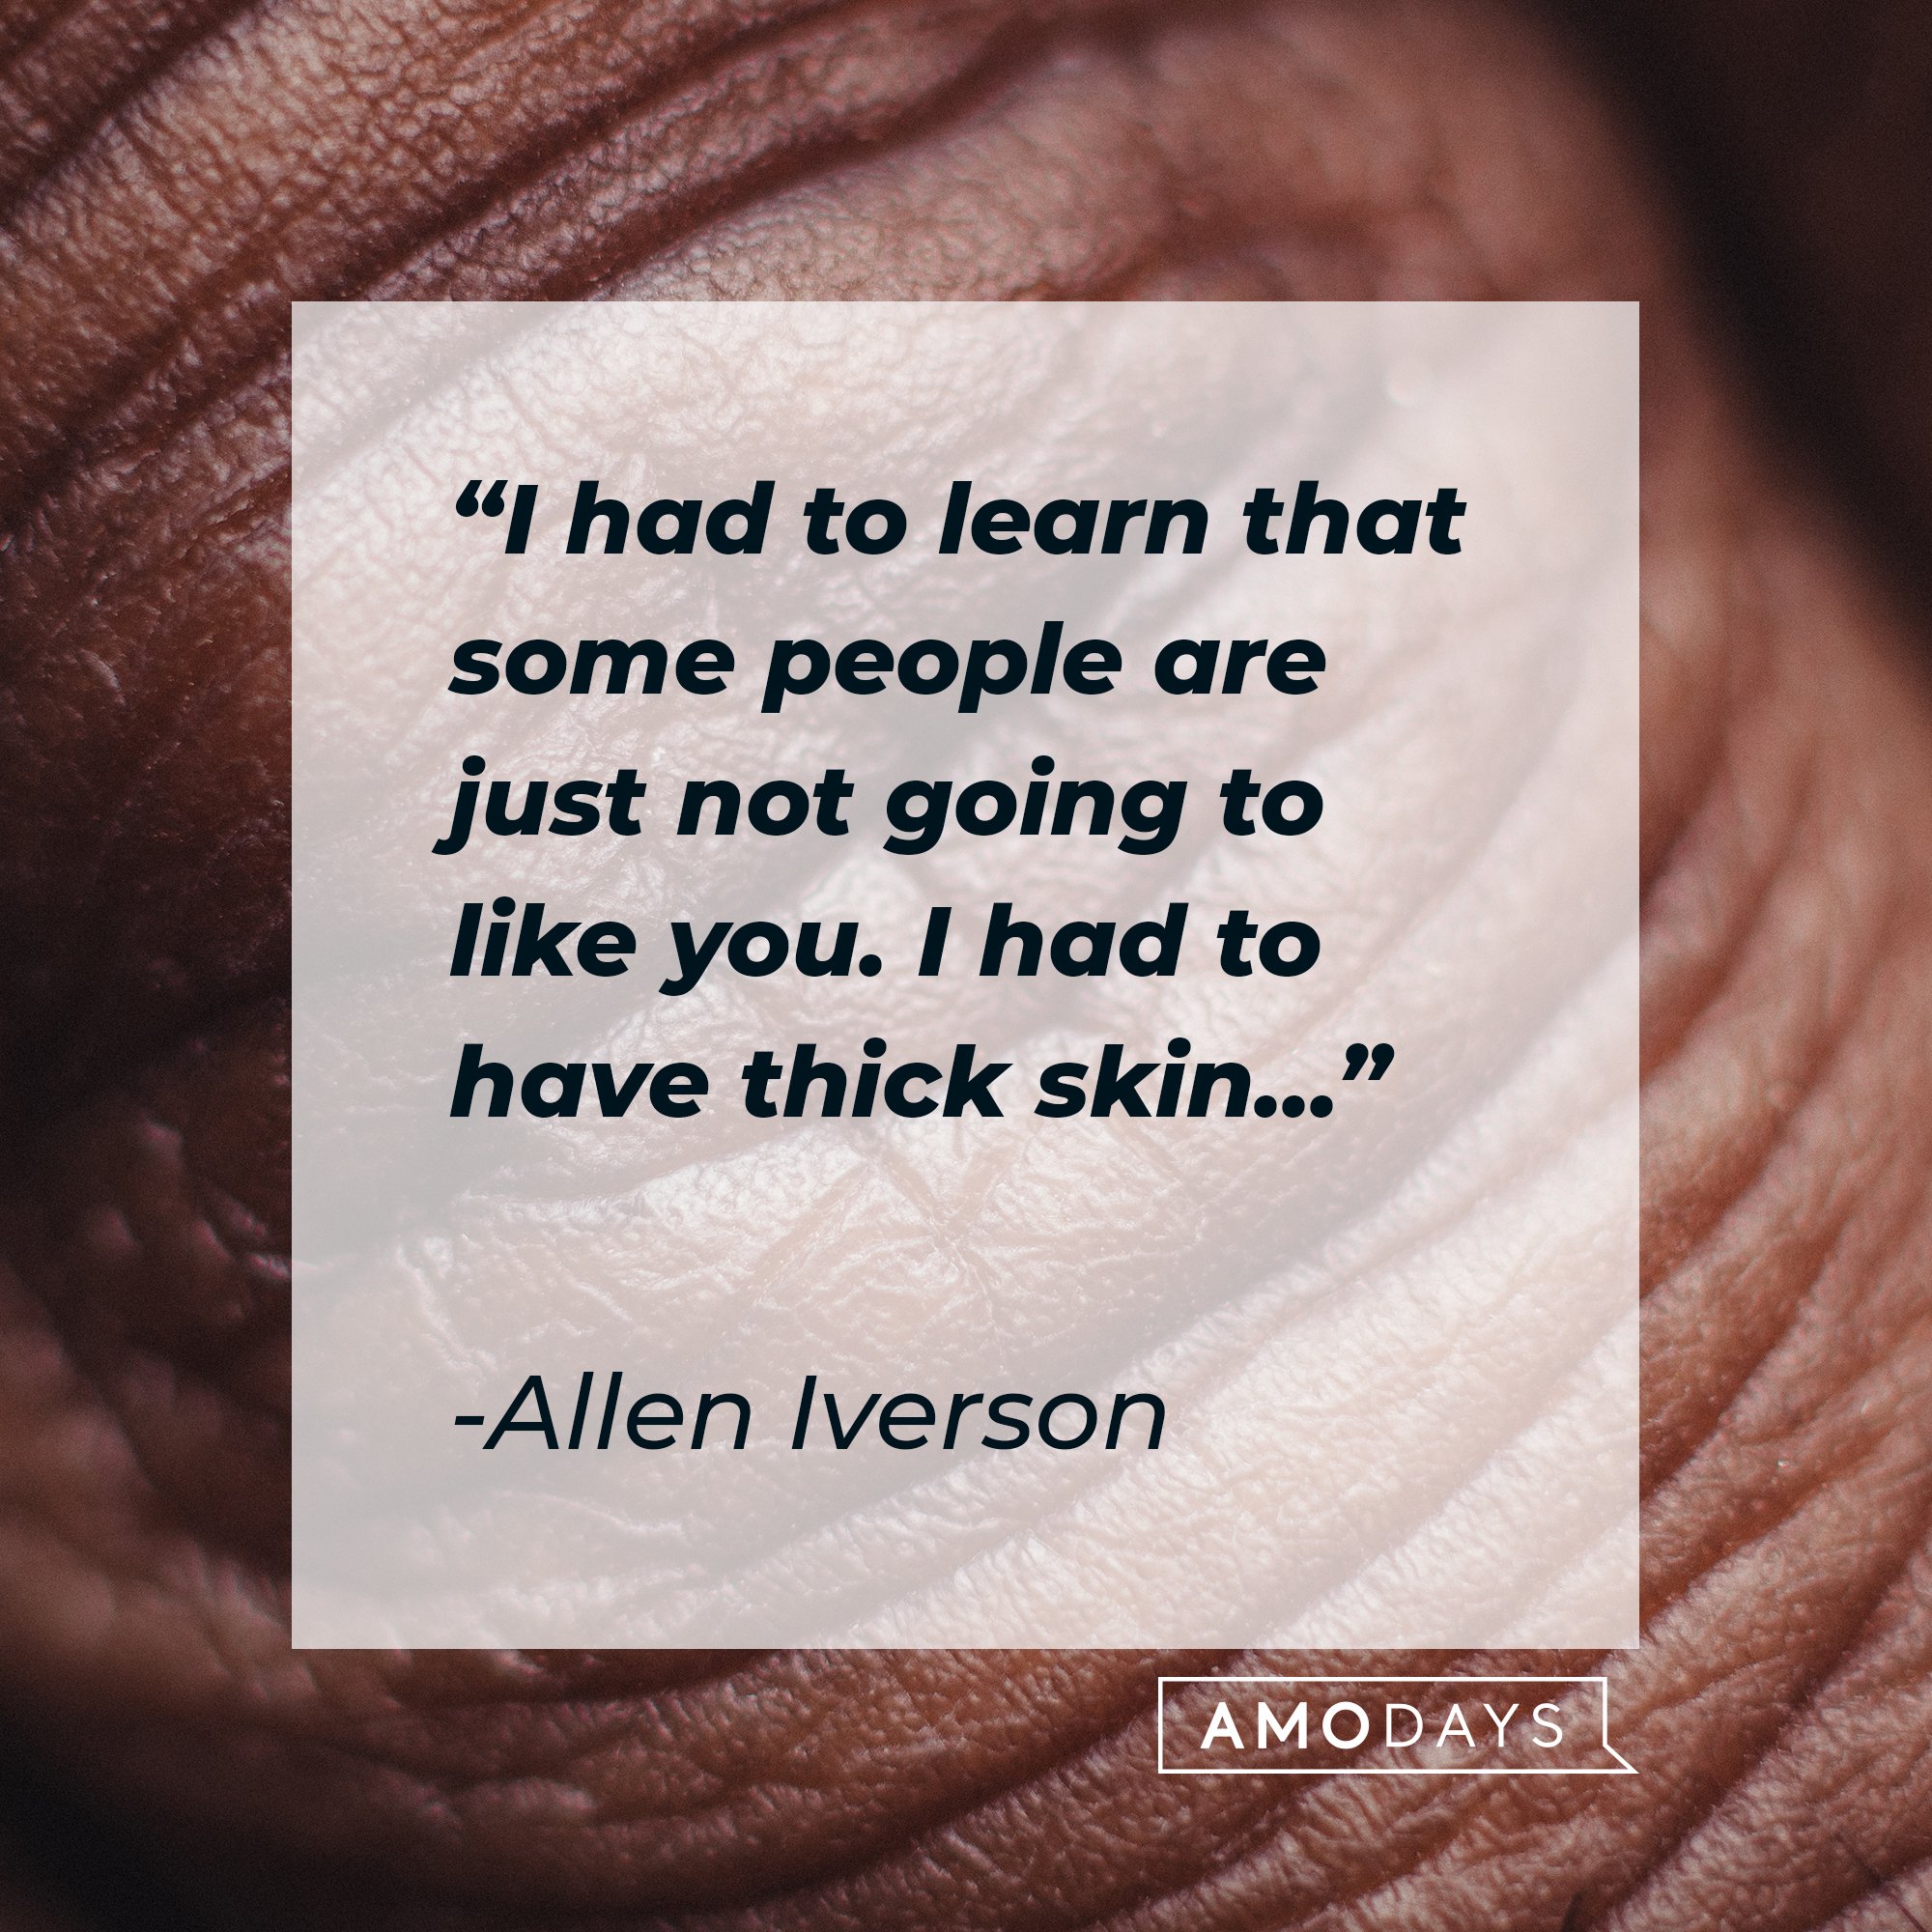 Allen Iverson's quote: "I had to learn that some people are just not going to like you. I had to have thick skin..."  | Image: AmoDays